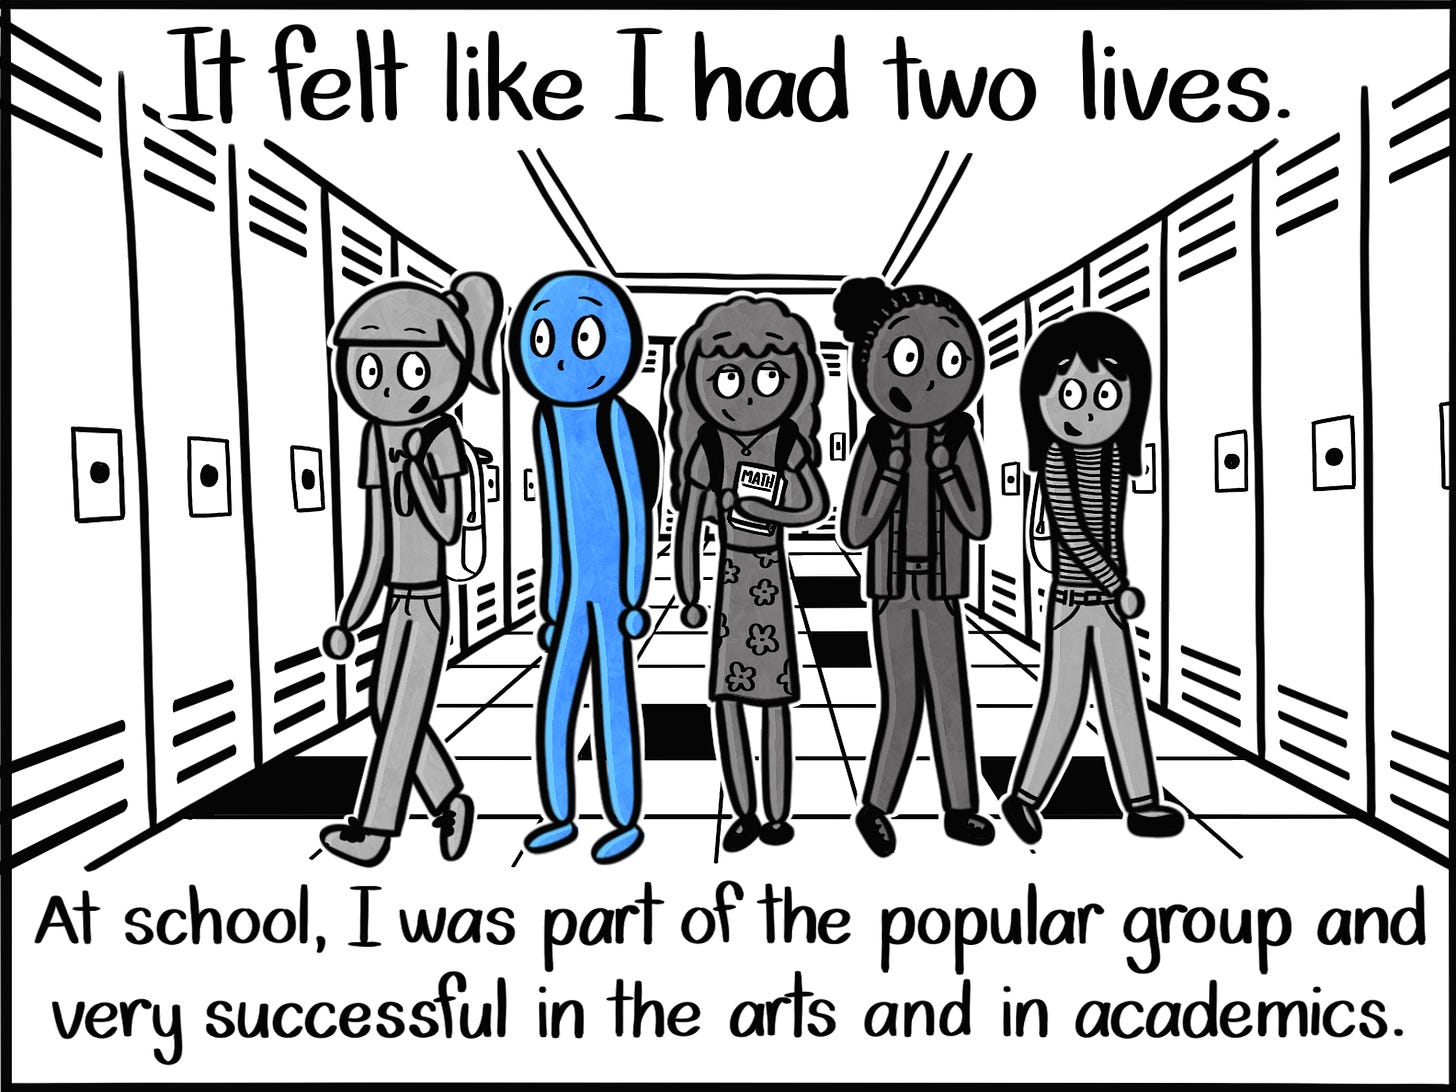 Caption: It felt like I had two lives. At school, I was part of the popular group and very successful in the arts and in academics. Image: Five teenage characters walk down a school hallway surrounded by lockers. From left to right, a sporty girl with a blonde ponytail, the Blue Person, a tan-skinned girly girl with long curly hair wearing a floral skirt and clutching a math book, a dark-skinned tomboy with a curly bun and a jacket, and a short dark-haired girl with a striped shirt and jeans. 